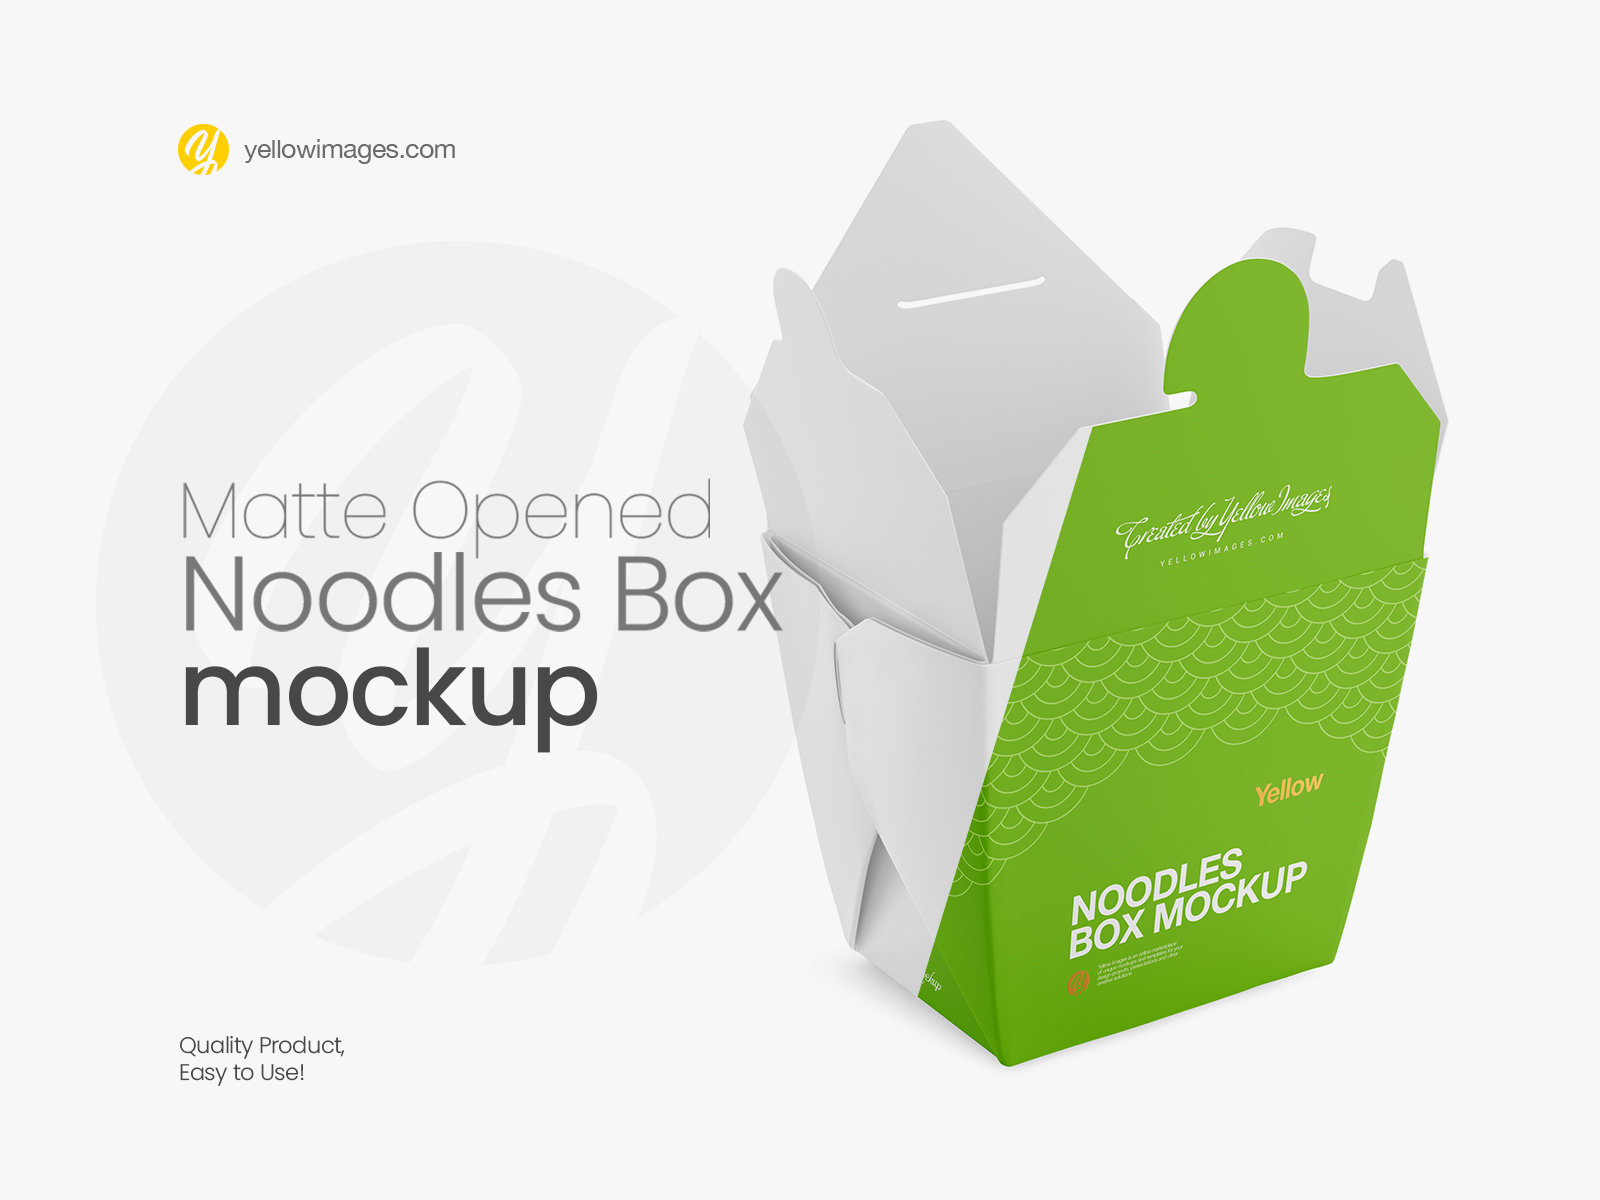 Download 14 Noodle Box Mockup Images Yellowimages Mockups